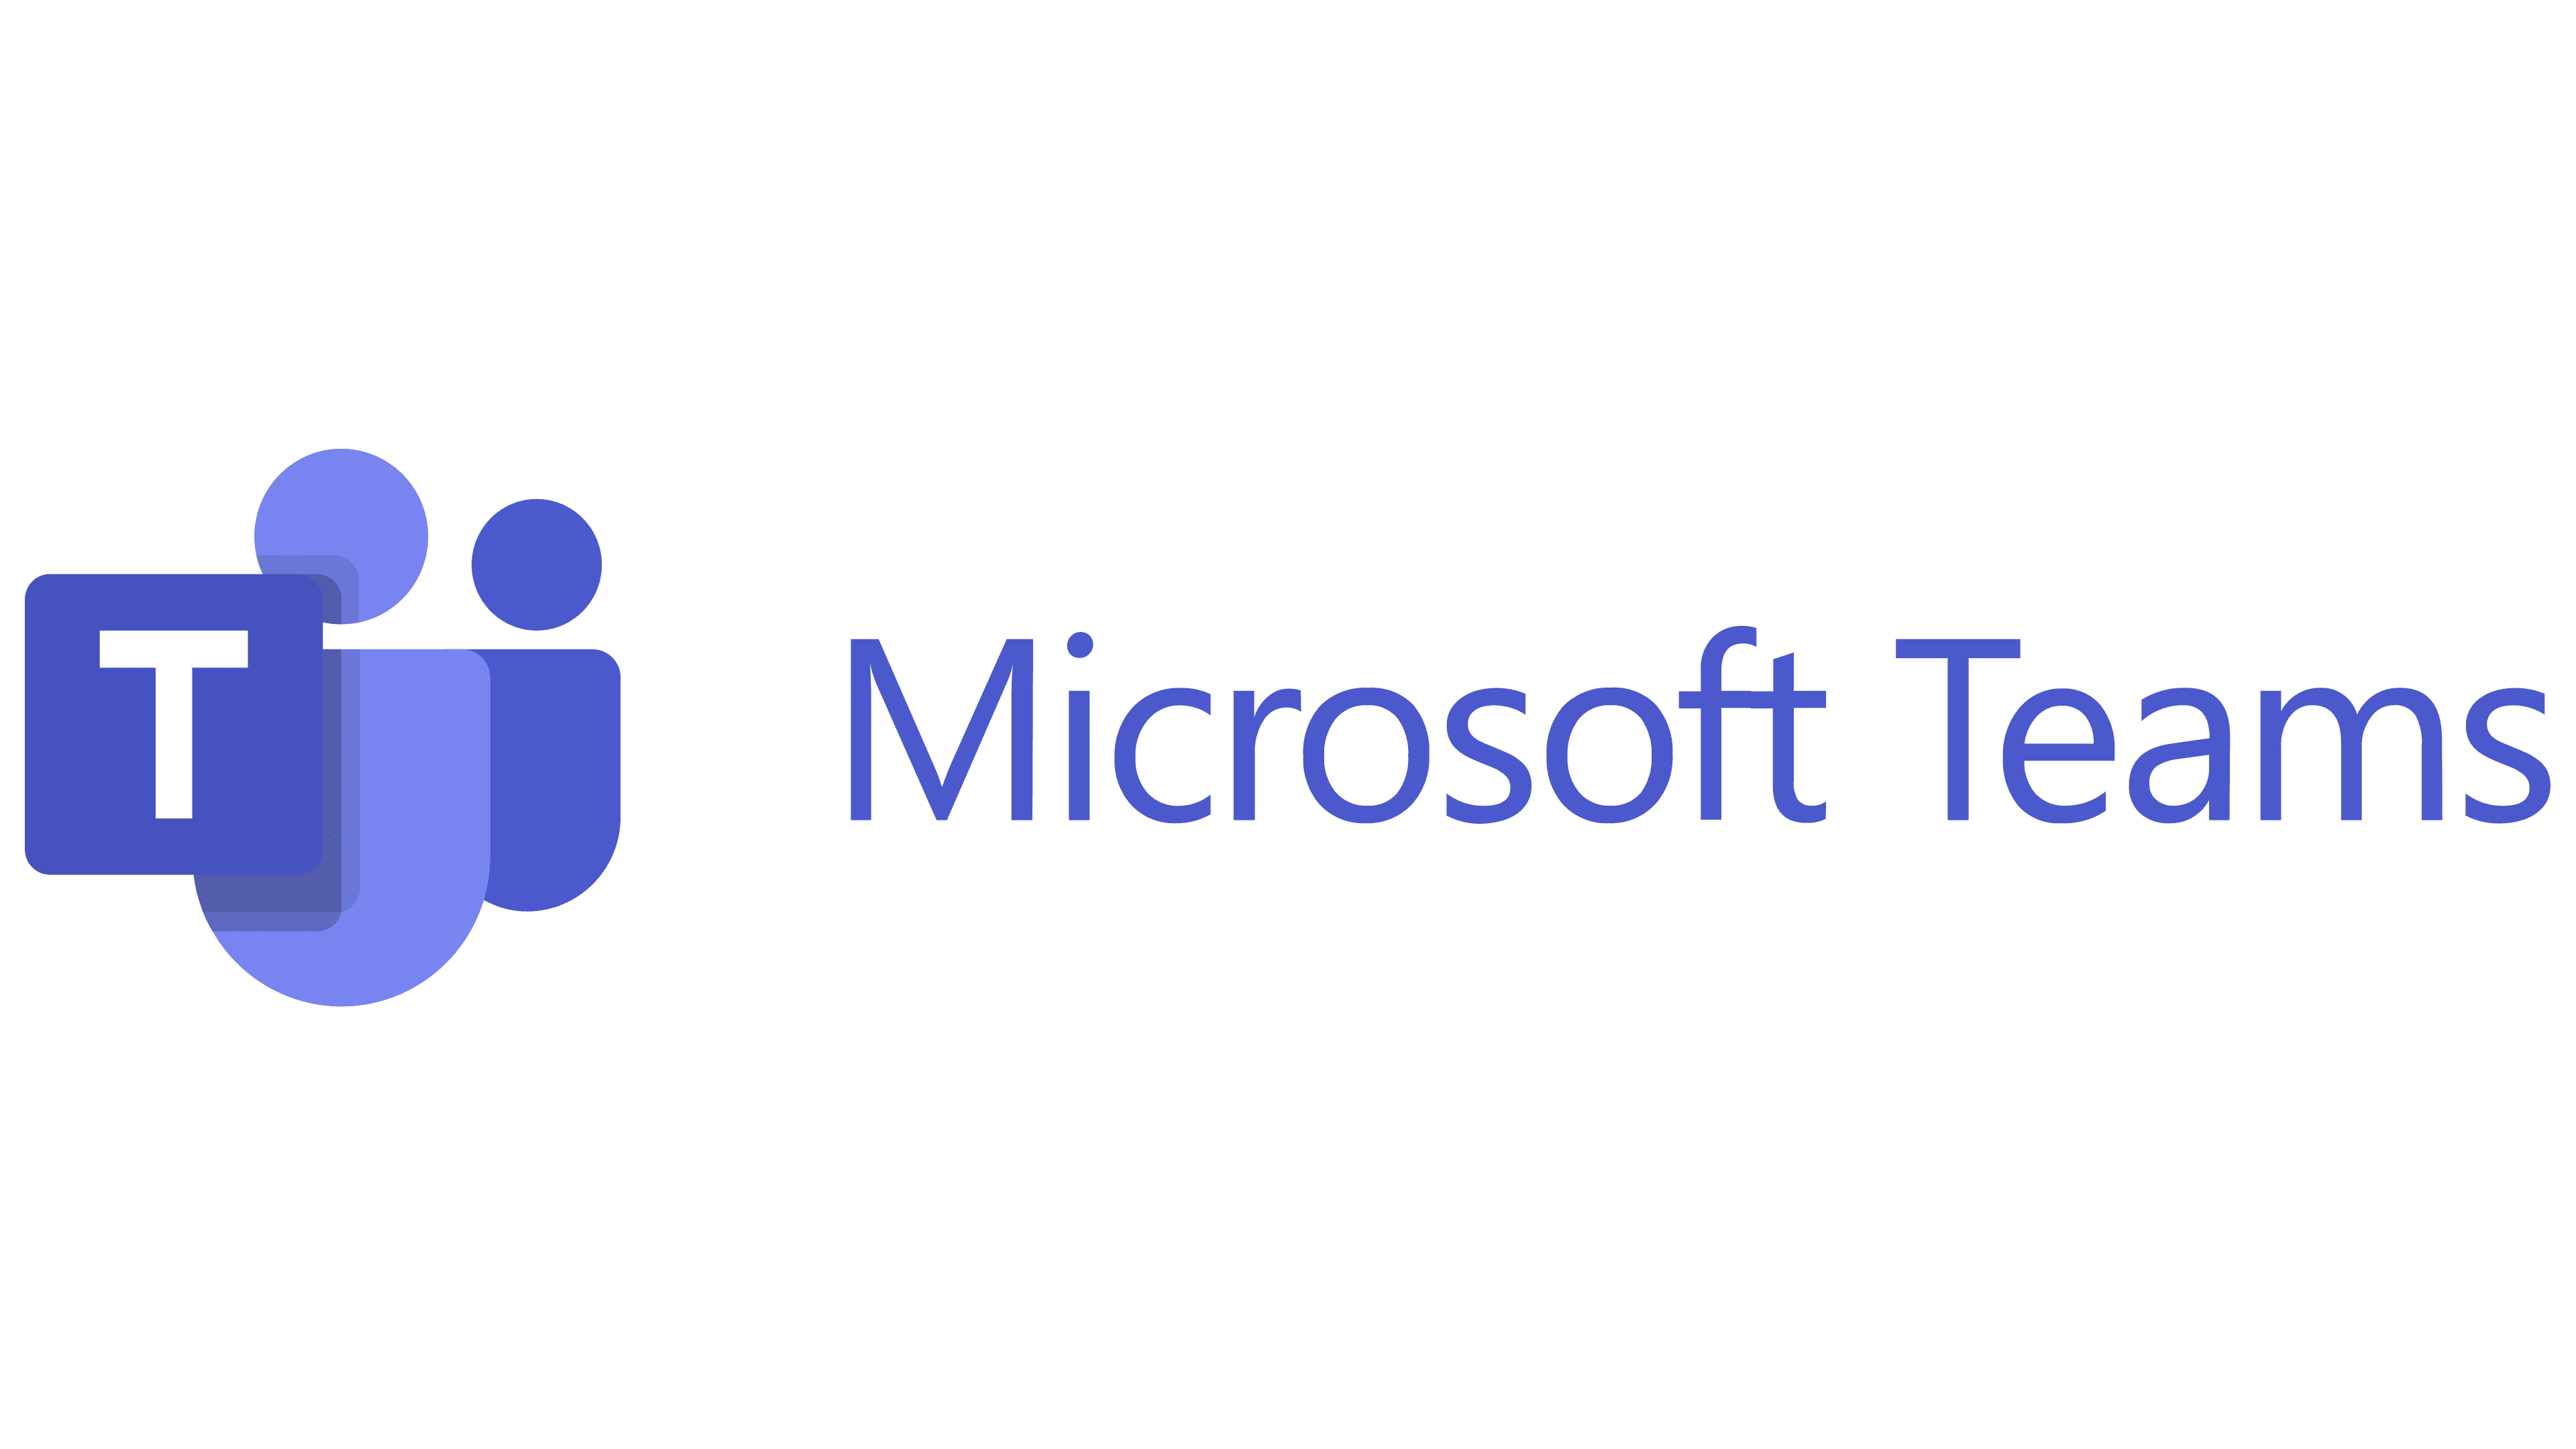 Microsoft Teams will soon run natively on Cisco Room and Desk devices